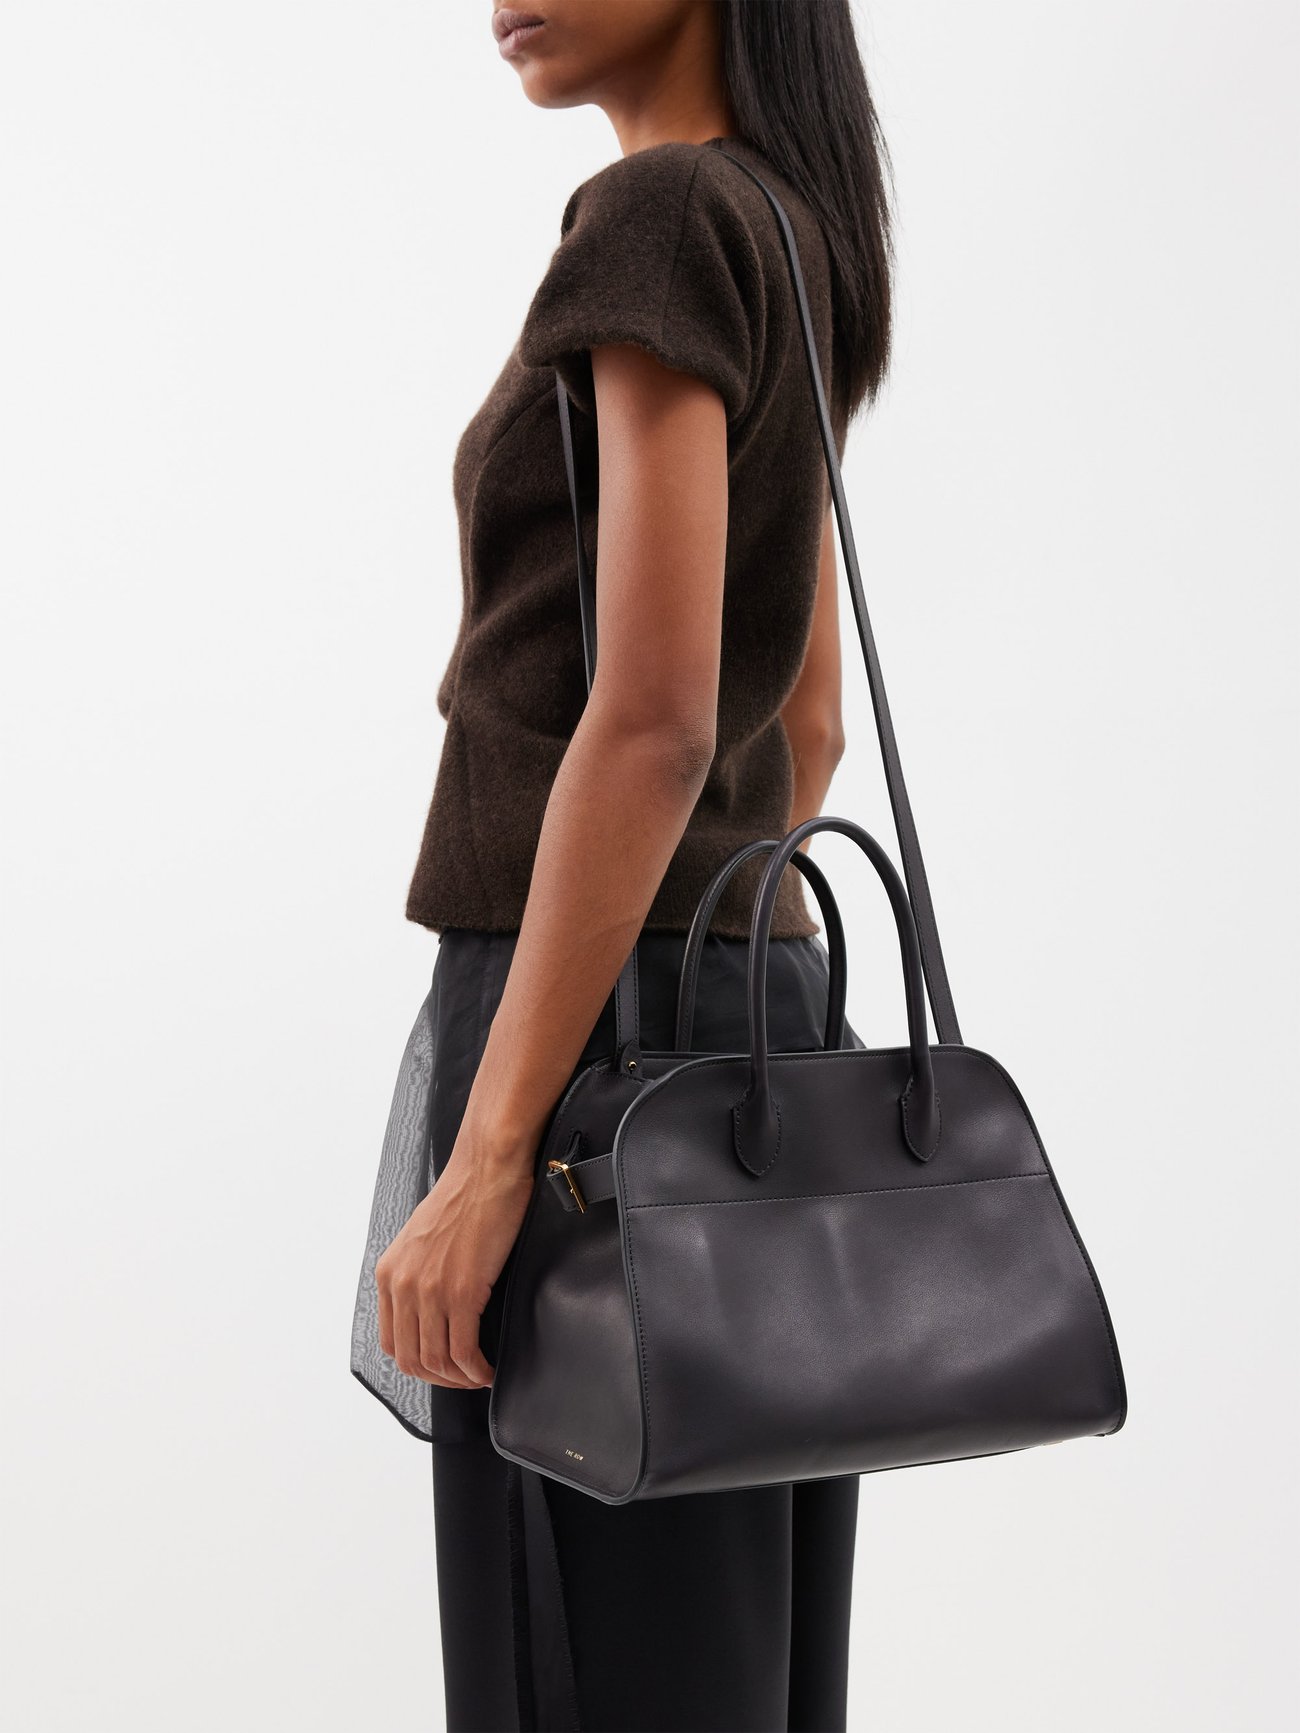 The Row - Soft Margaux 12 Deep Brown Leather Top Handle Bag